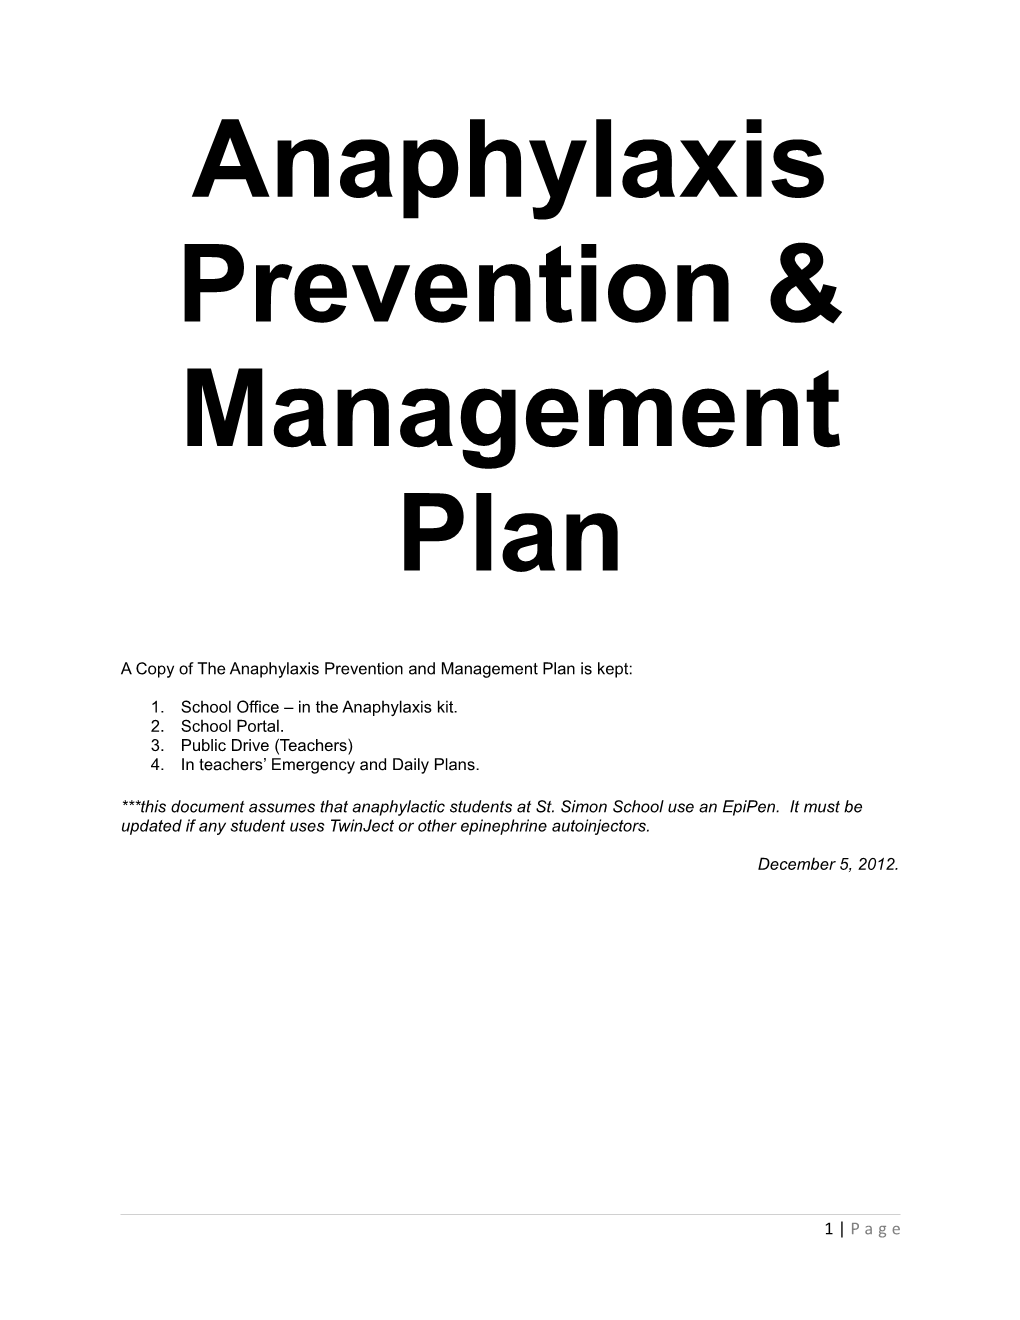 A Copy of the Anaphylaxis Prevention and Management Plan Is Kept